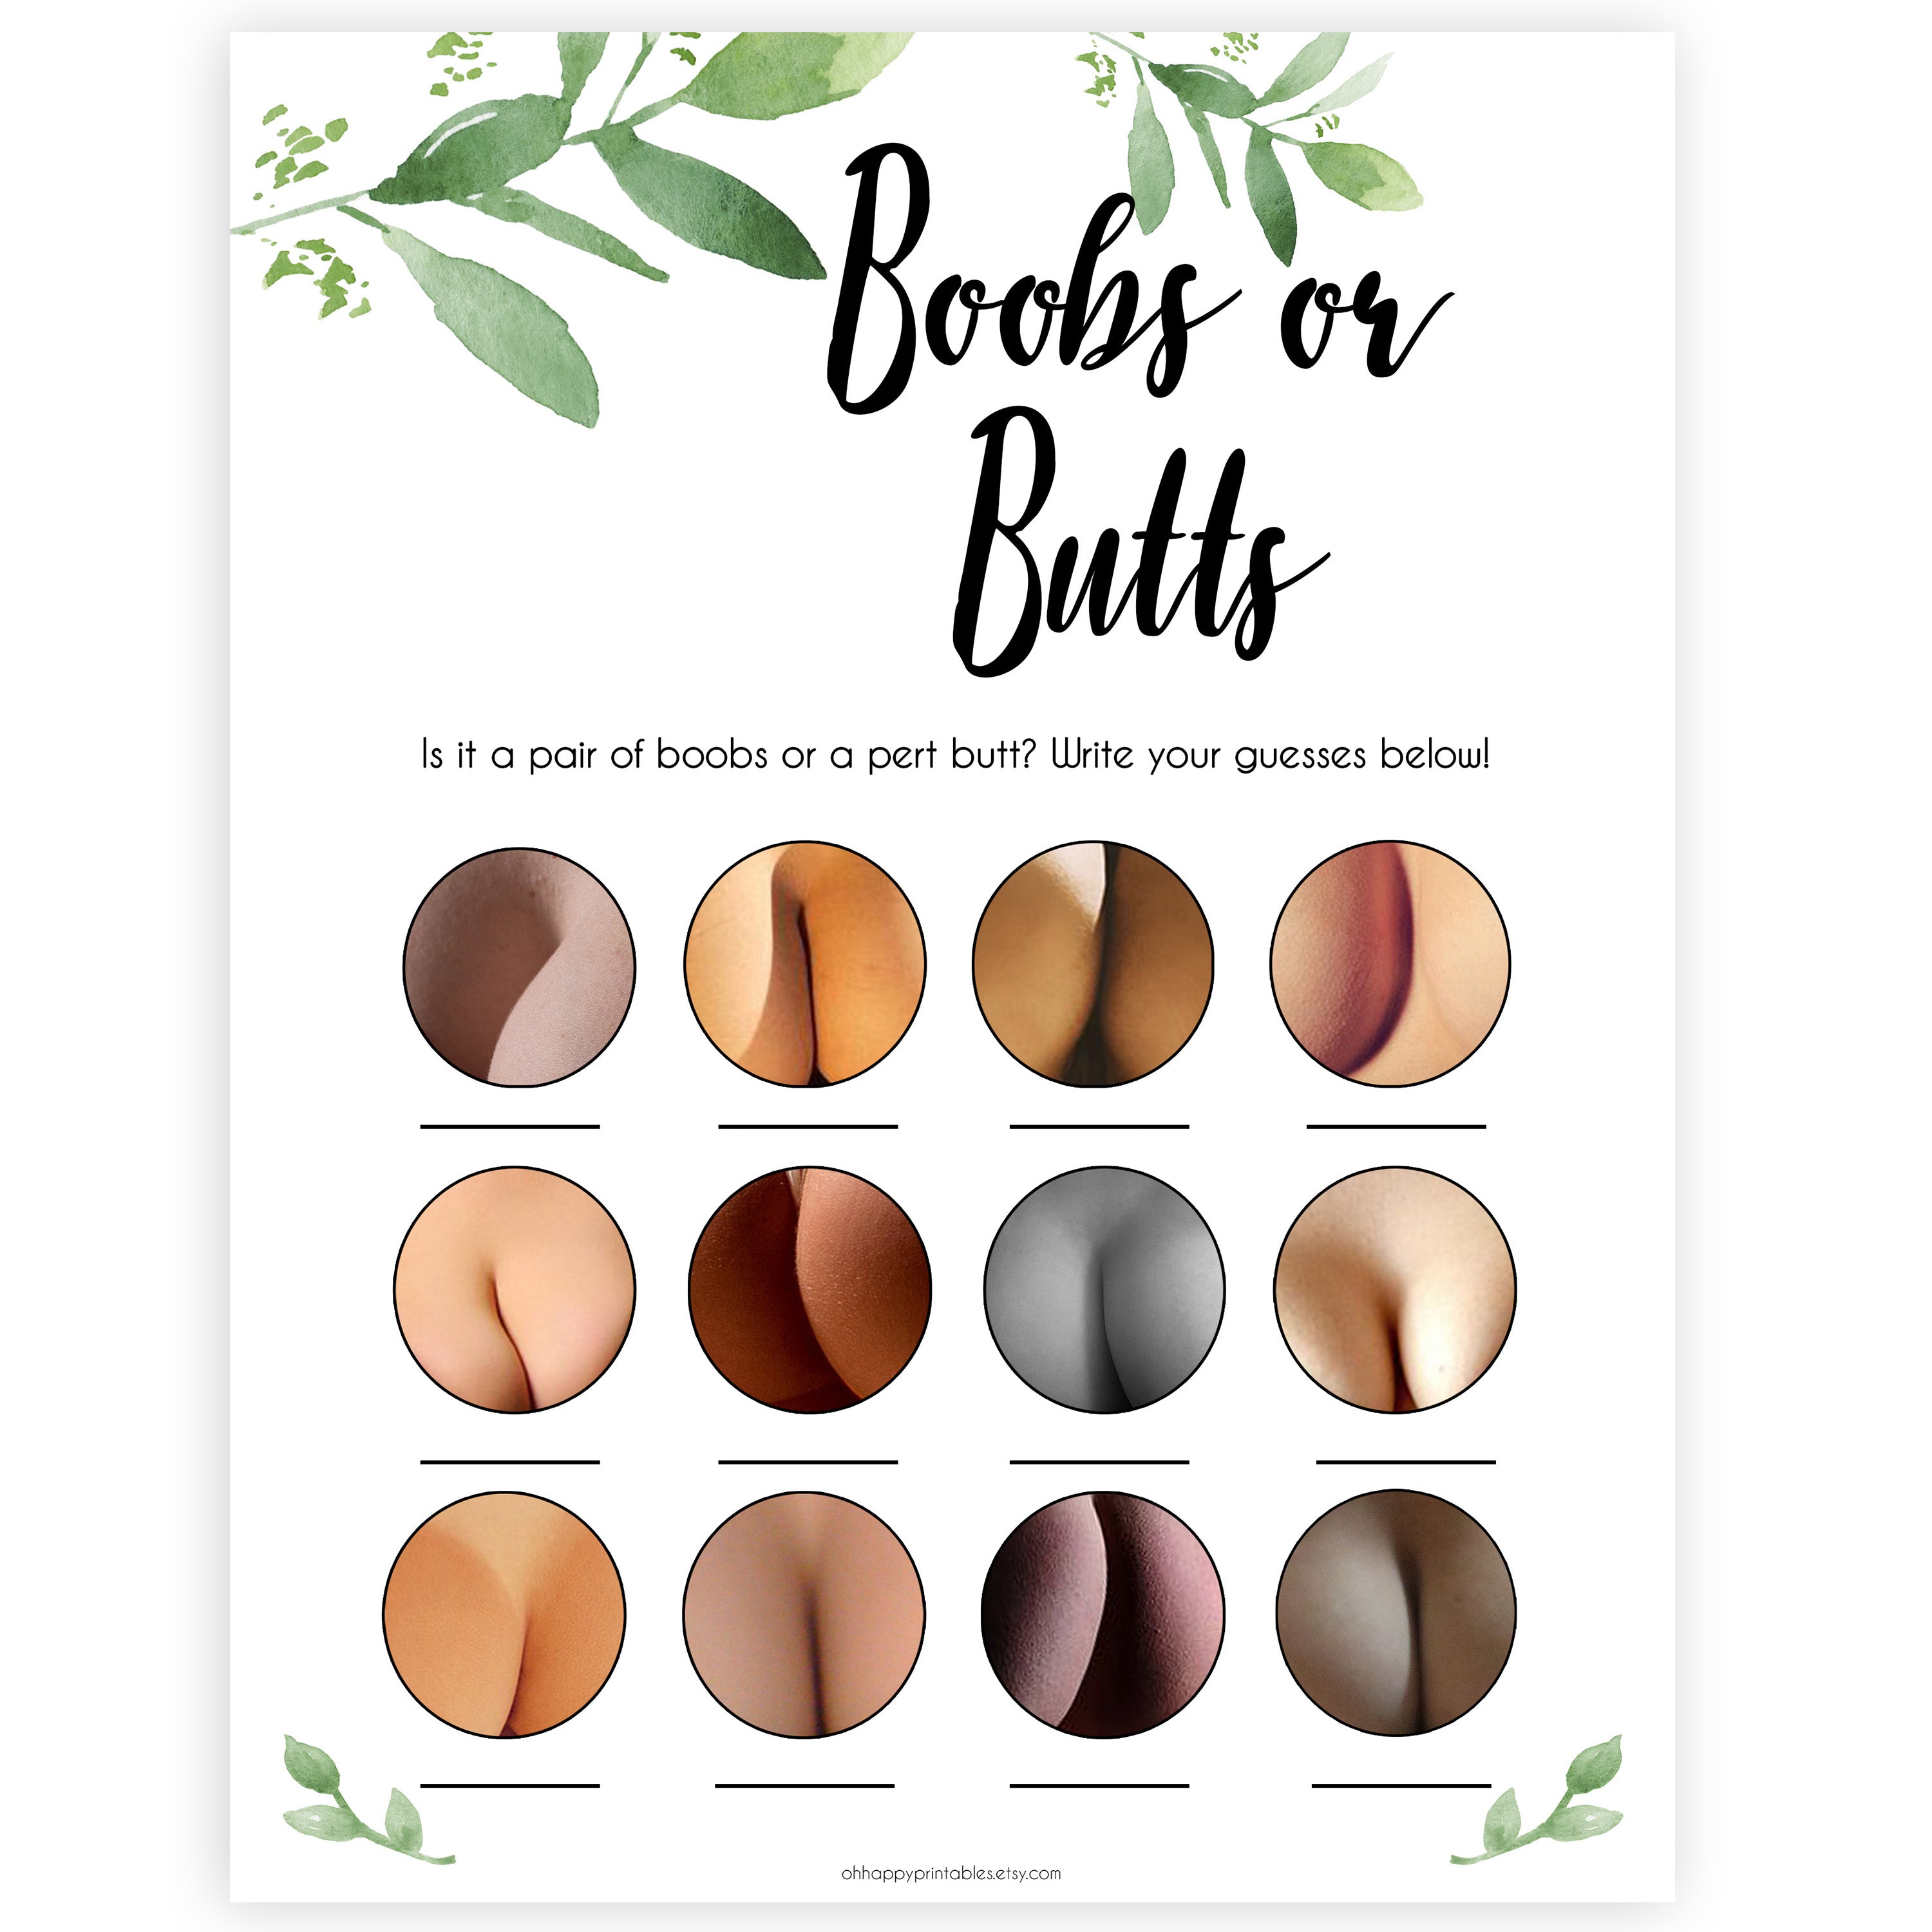 Boobs or Butts Baby Shower Game - Botanical Printable Baby Shower